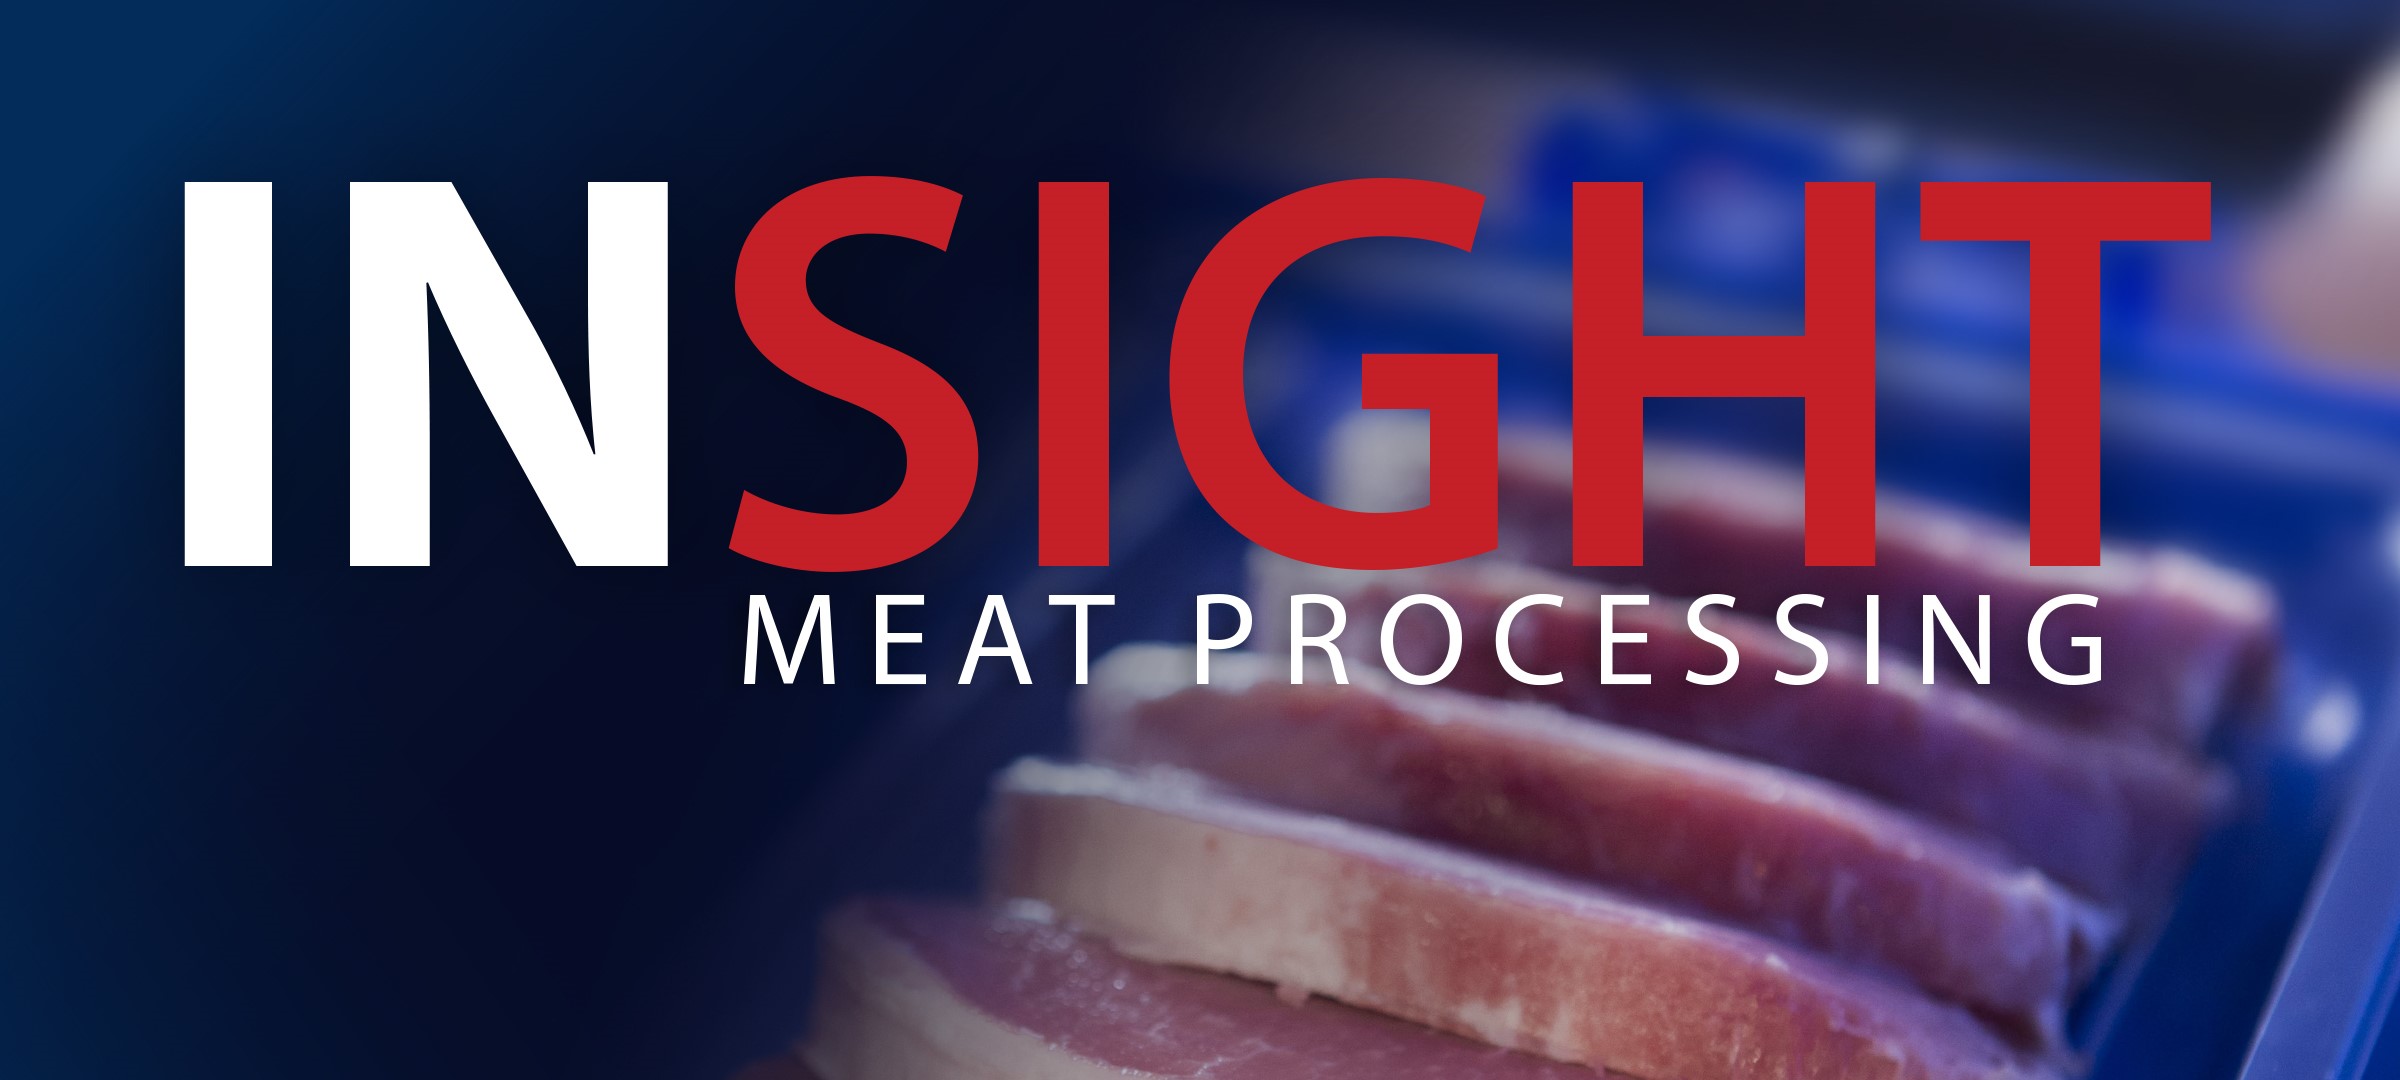 Insight Meat Processing - A Smart Move